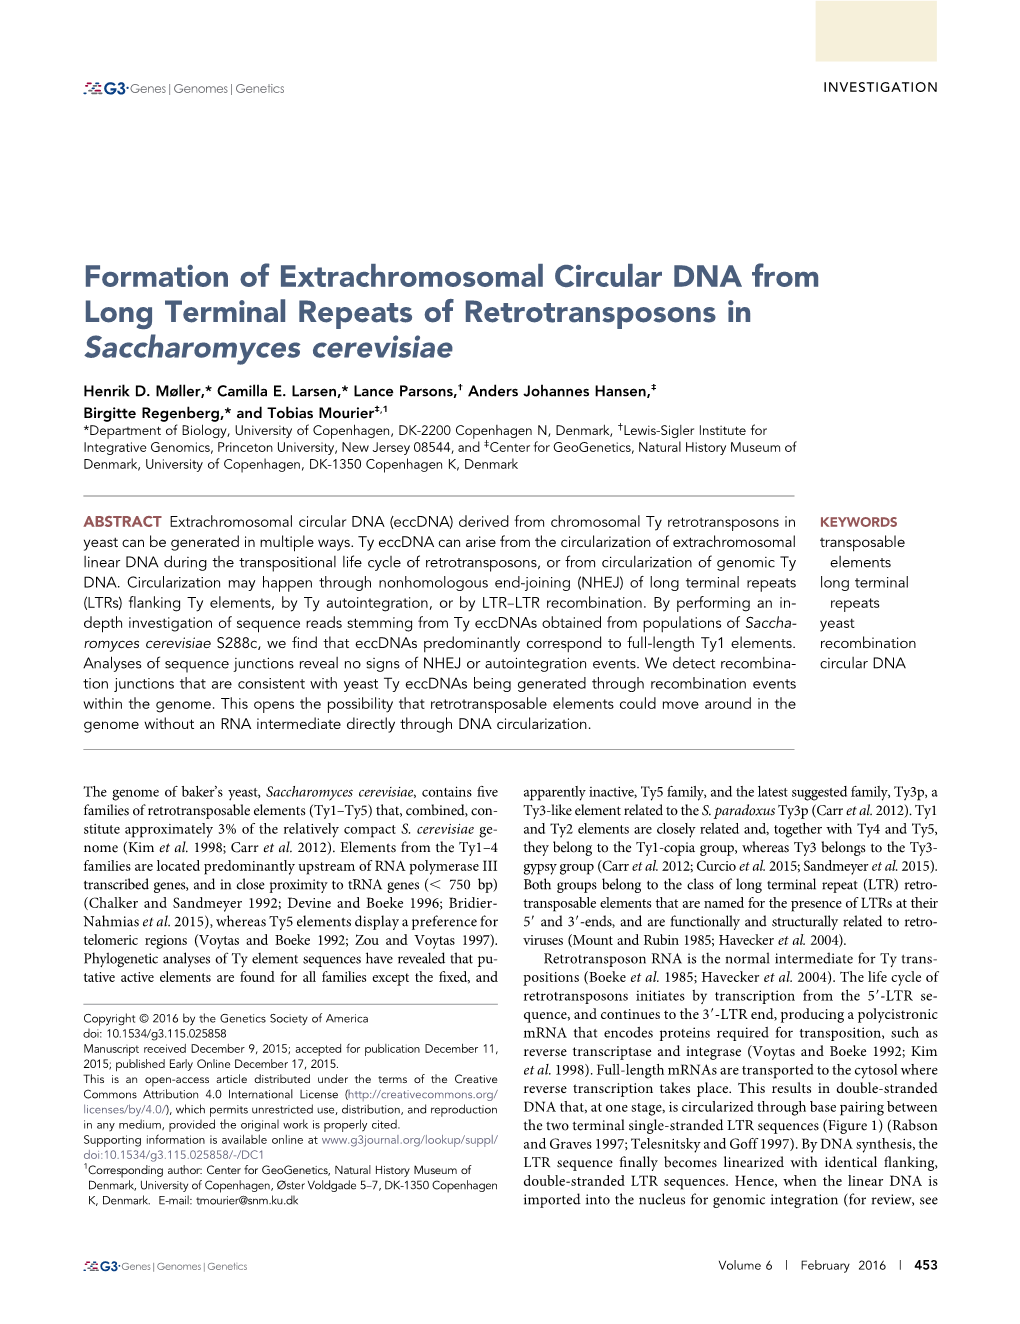 Formation of Extrachromosomal Circular DNA from Long Terminal Repeats of Retrotransposons in Saccharomyces Cerevisiae